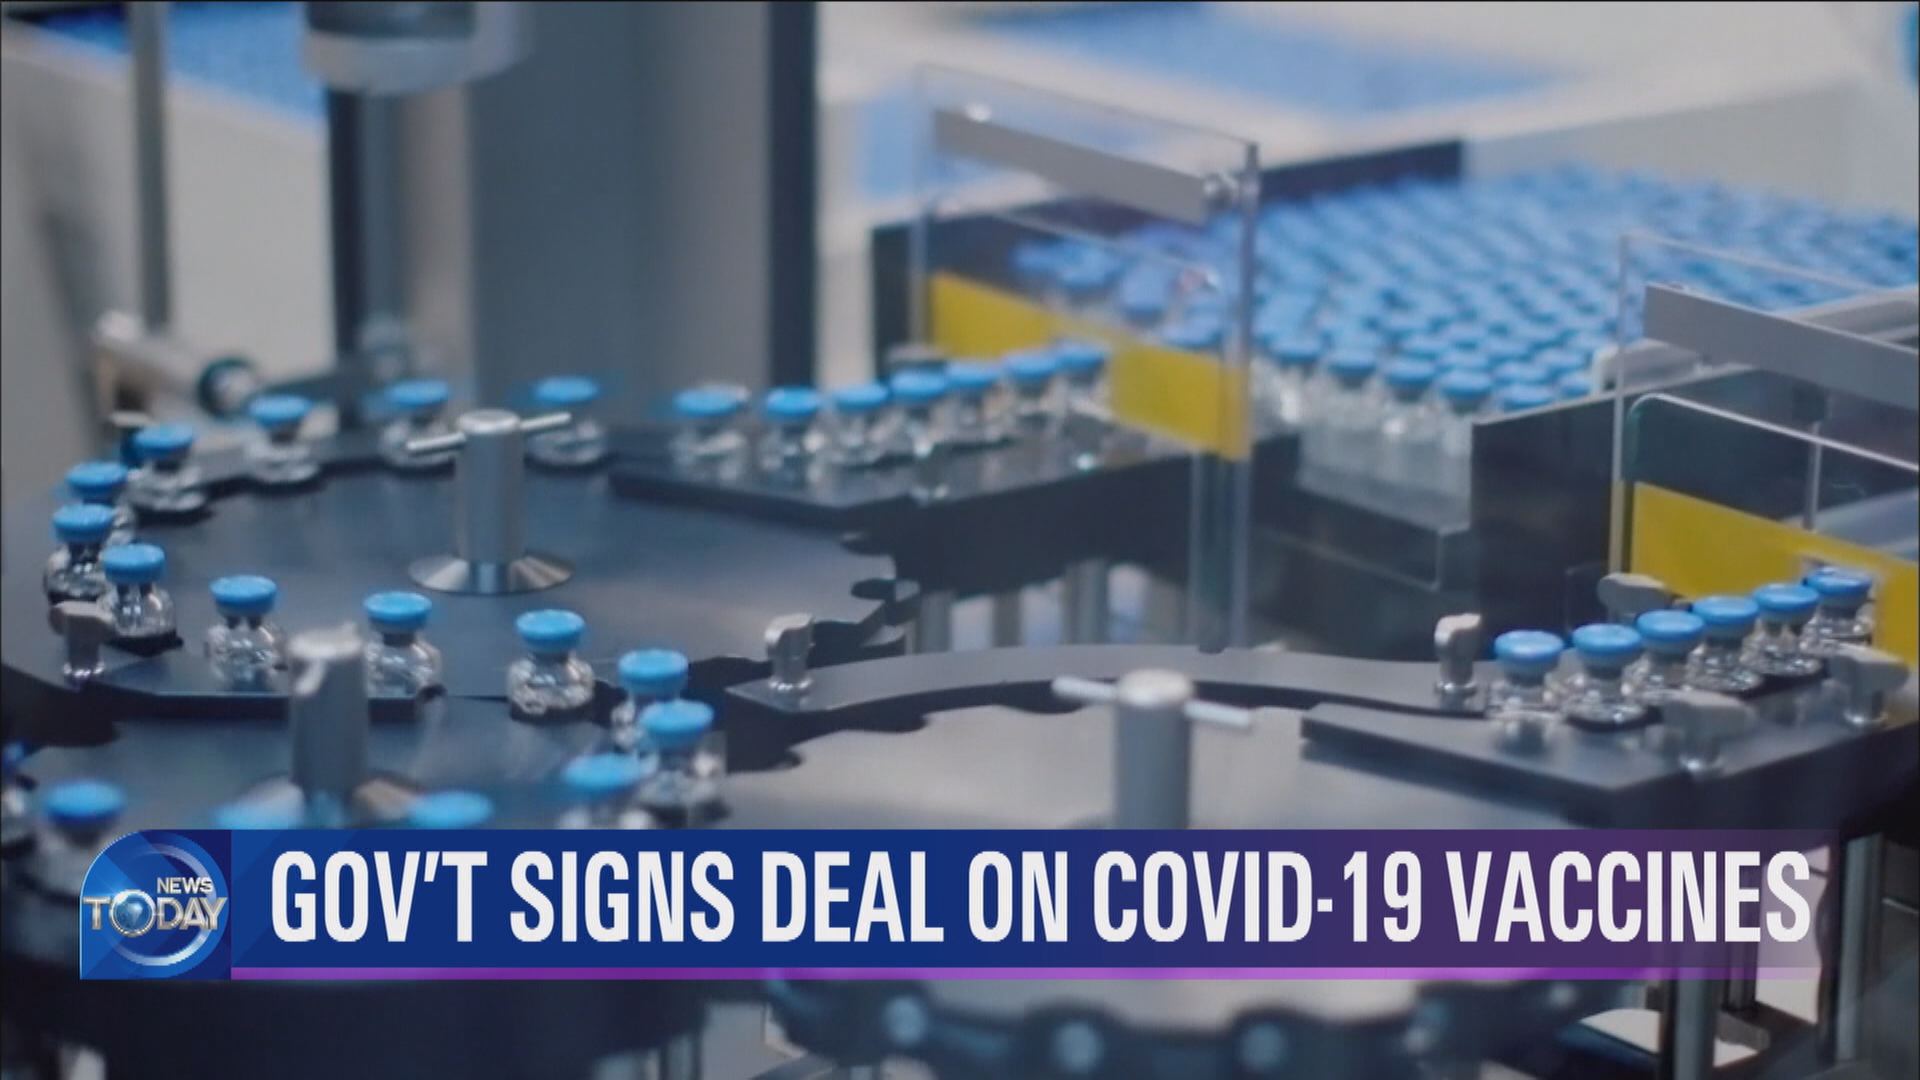 GOV’T SIGNS DEAL ON COVID-19 VACCINES